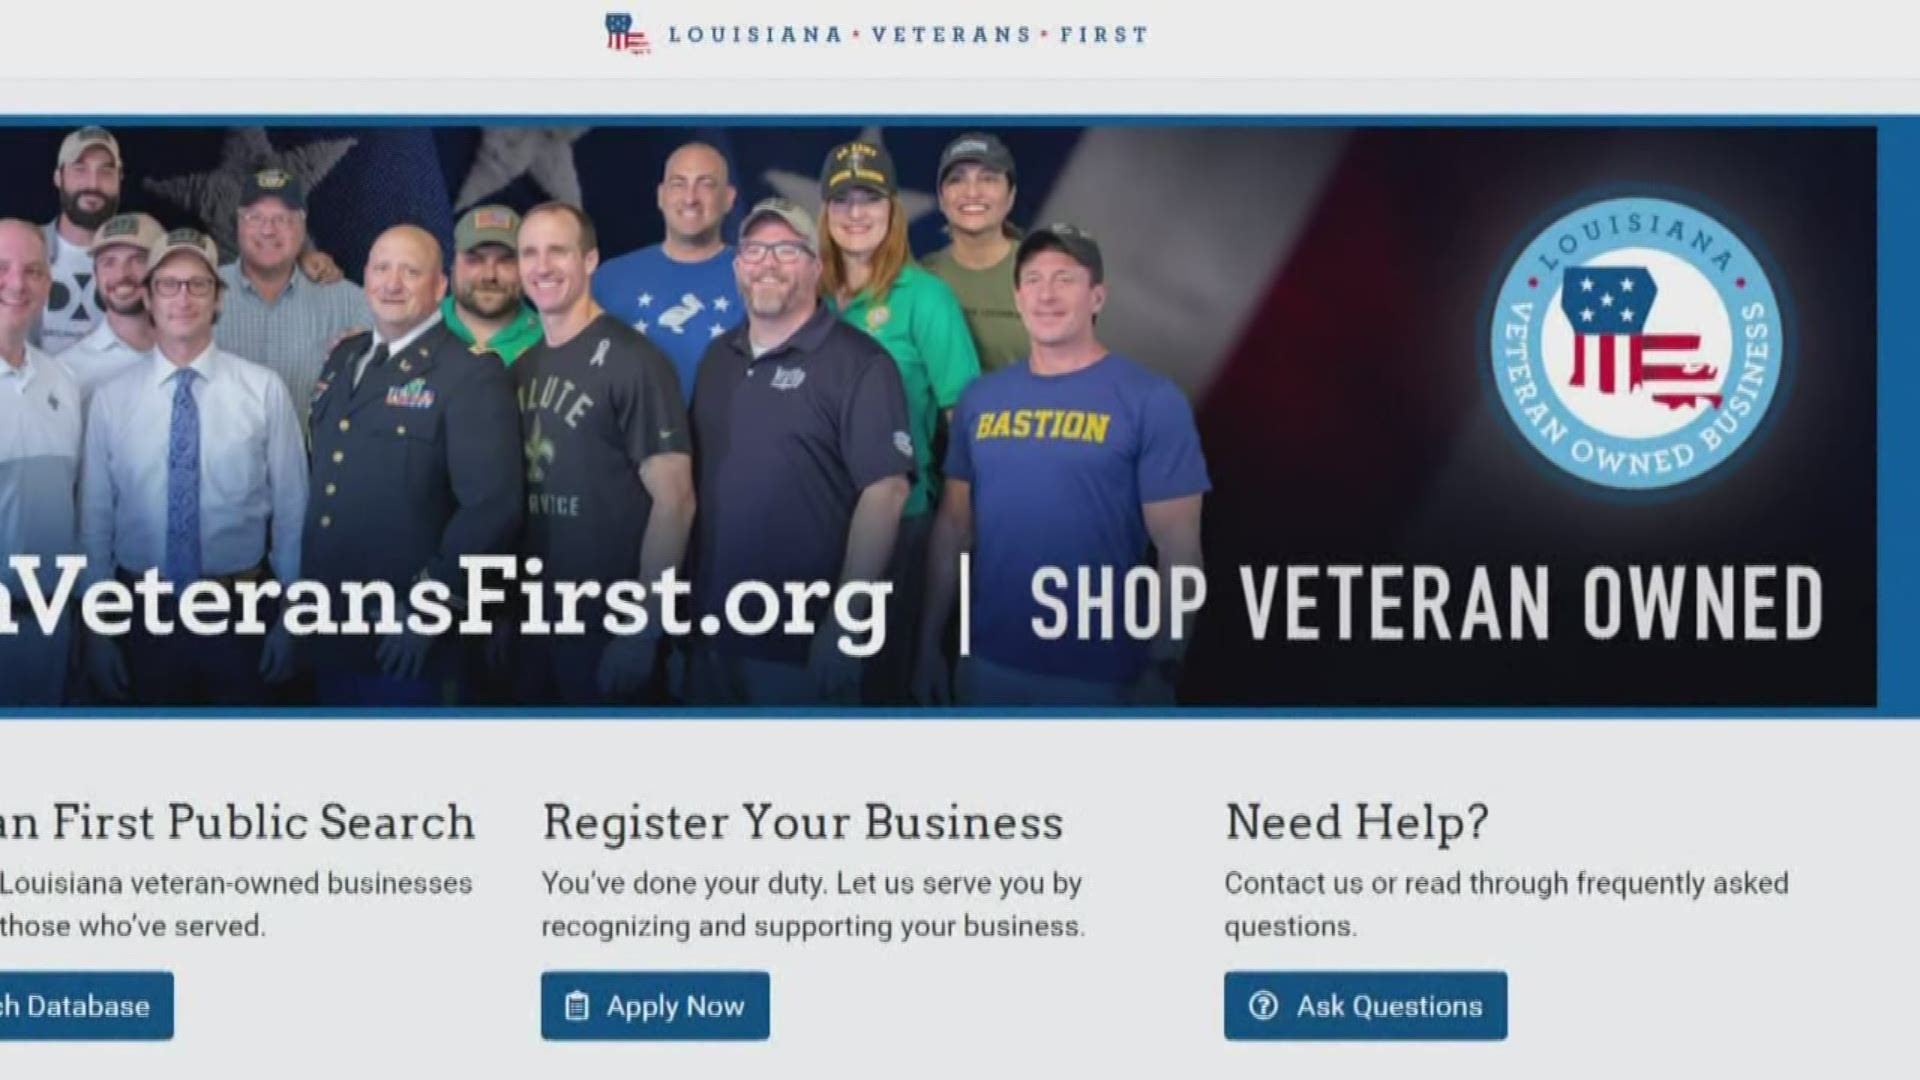 If a consumer wants to support veterans, they can search the database for businesses.